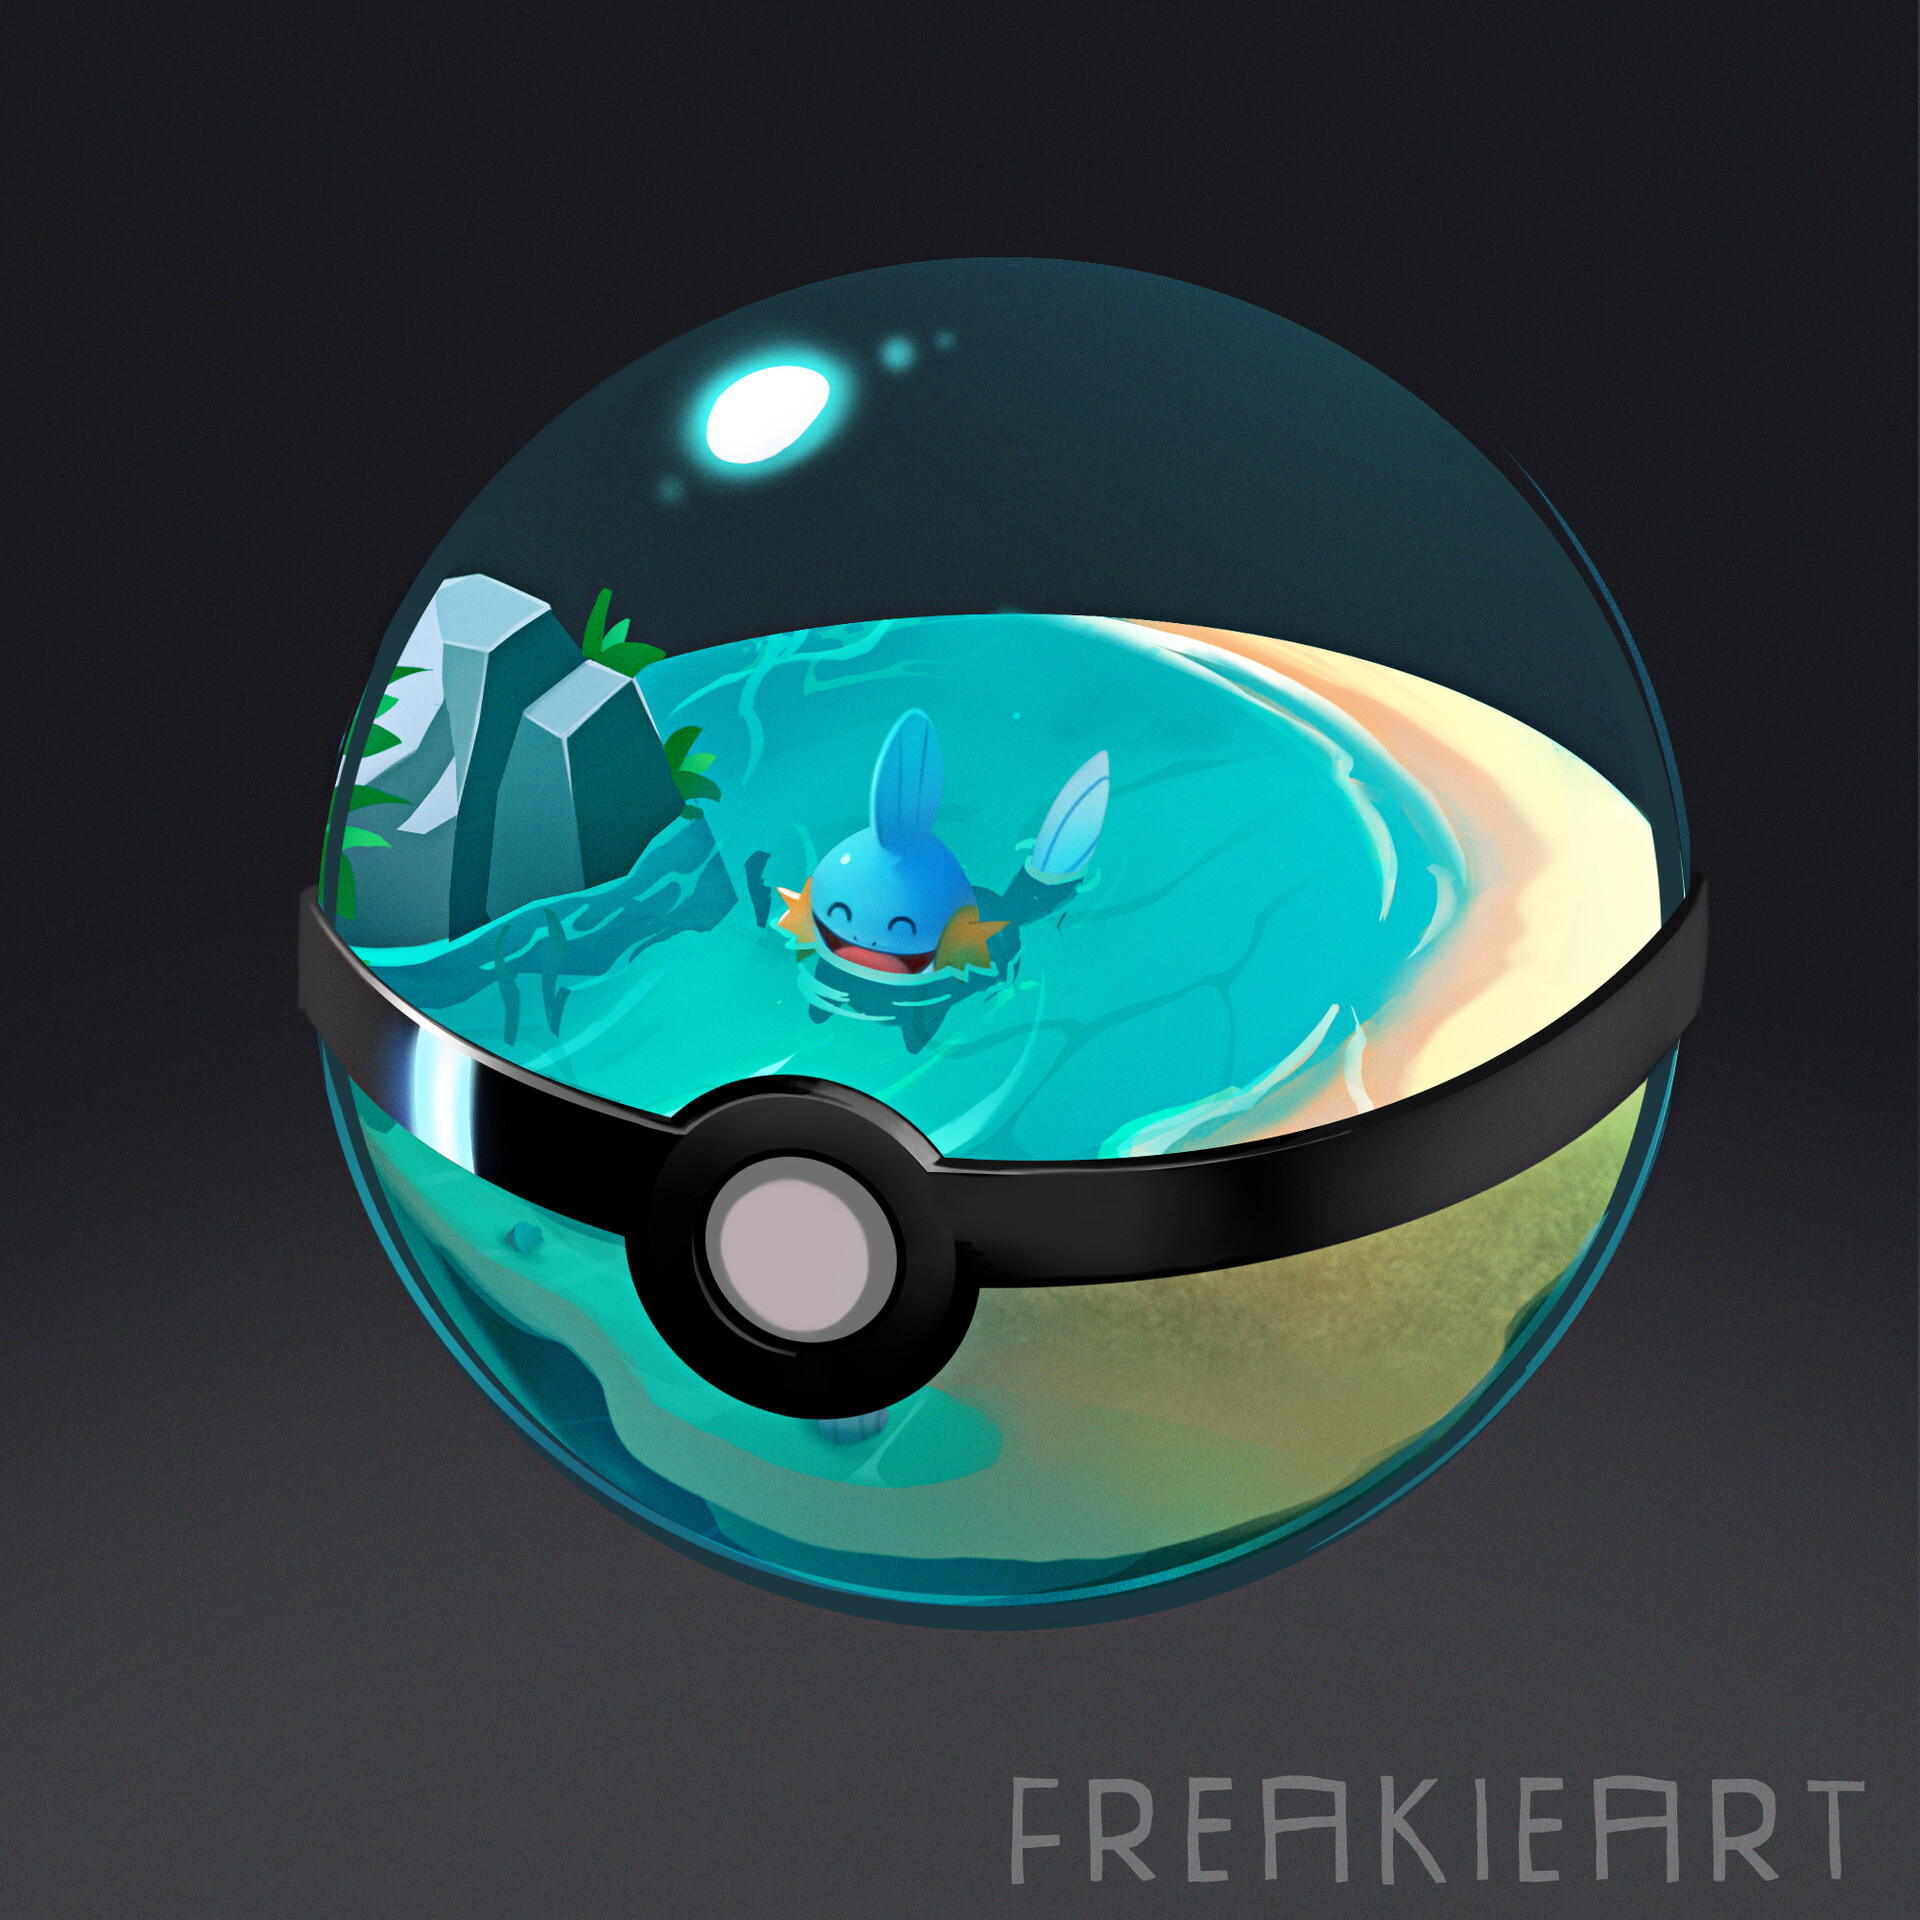 ArtStation - Pokemon inside the pokeball - Small and personal Project